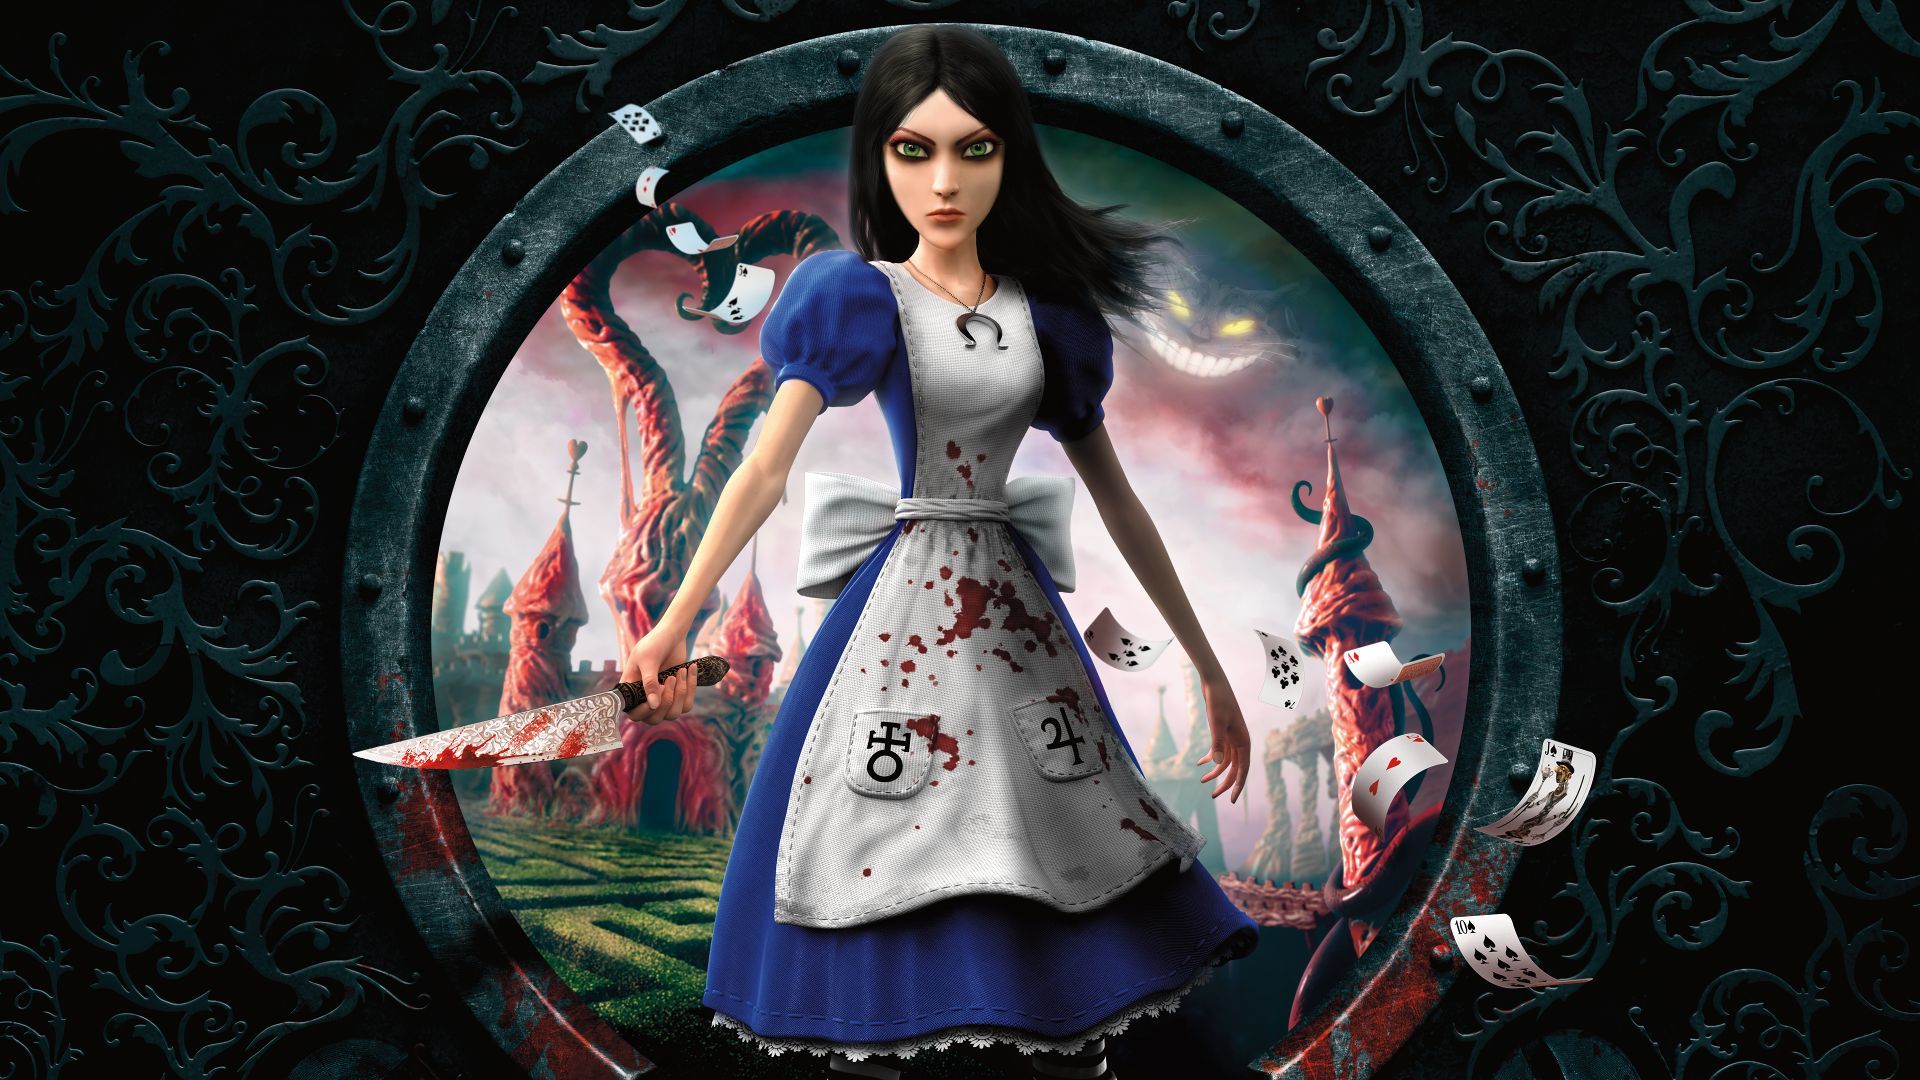 Alice 3 is abandoned and American McGee retires from the video game industry